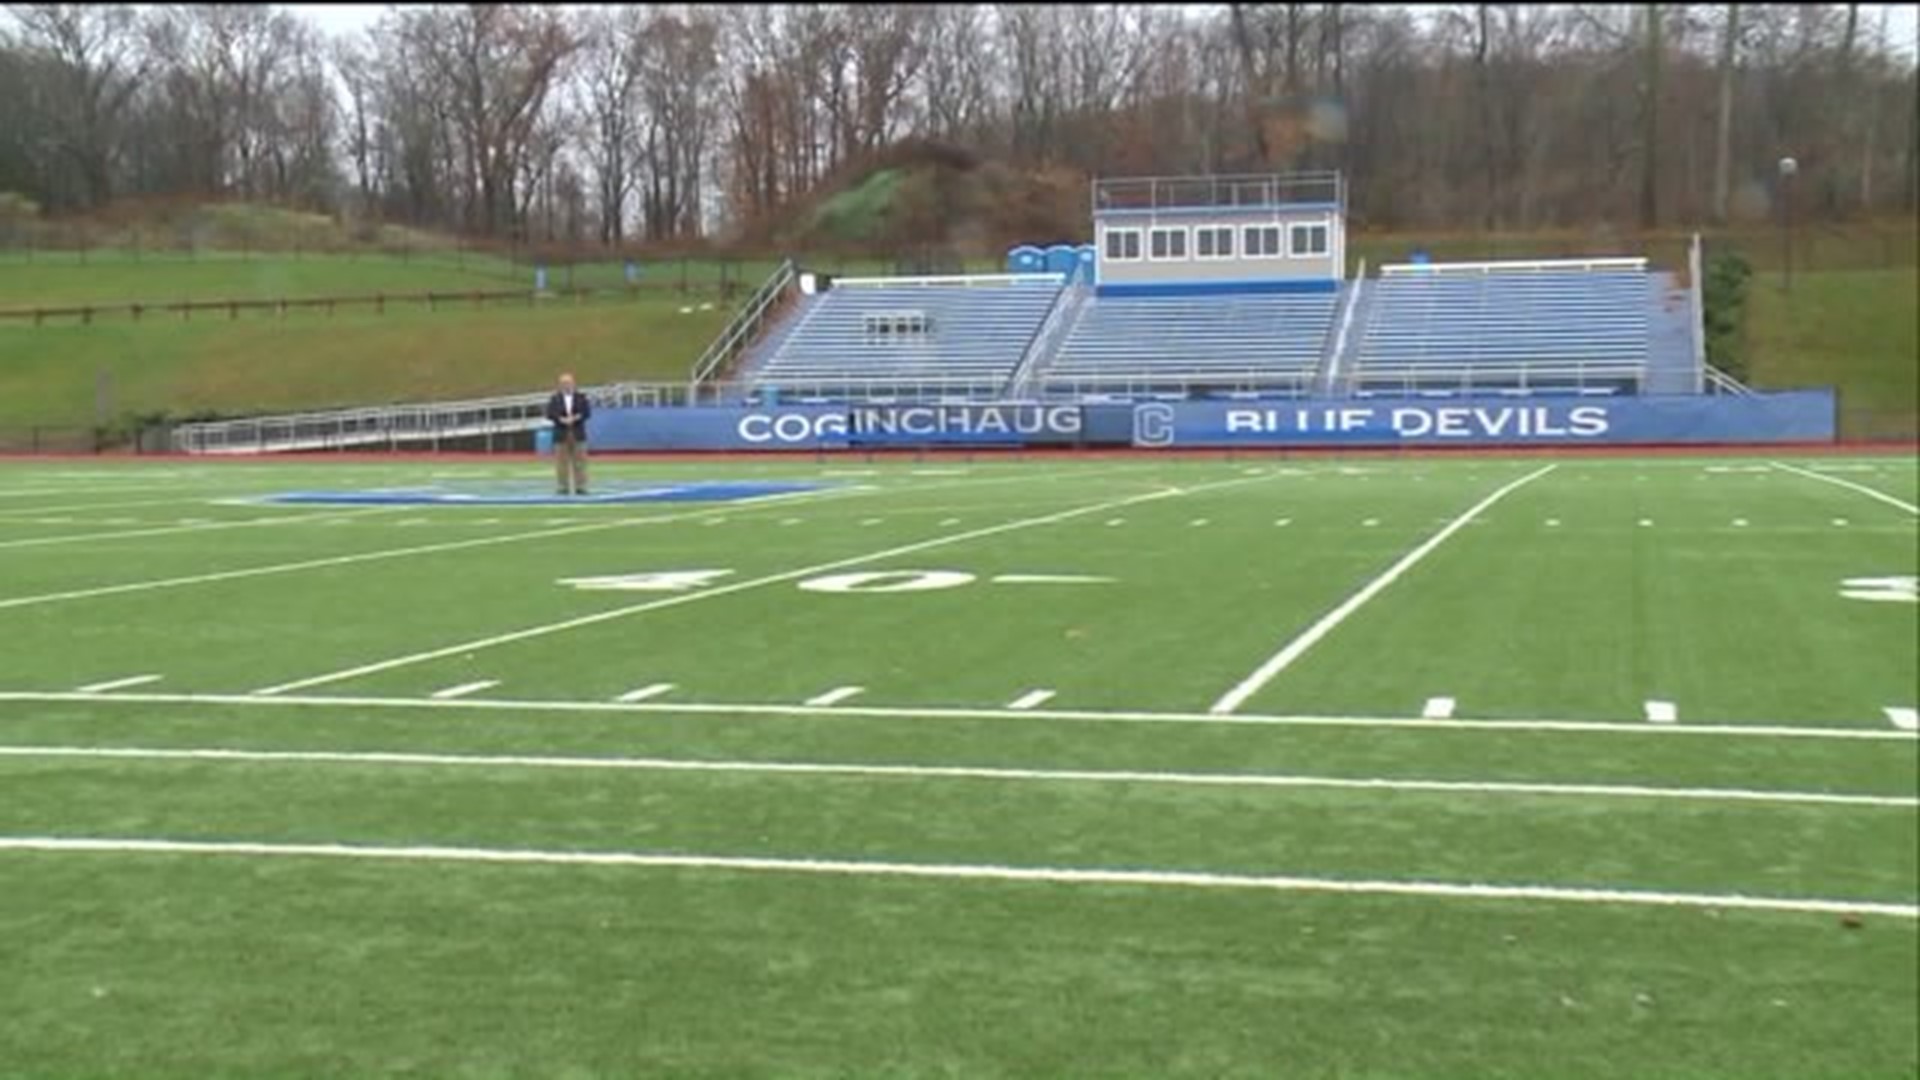 Football coach, player discuss feud that led the coach to quit